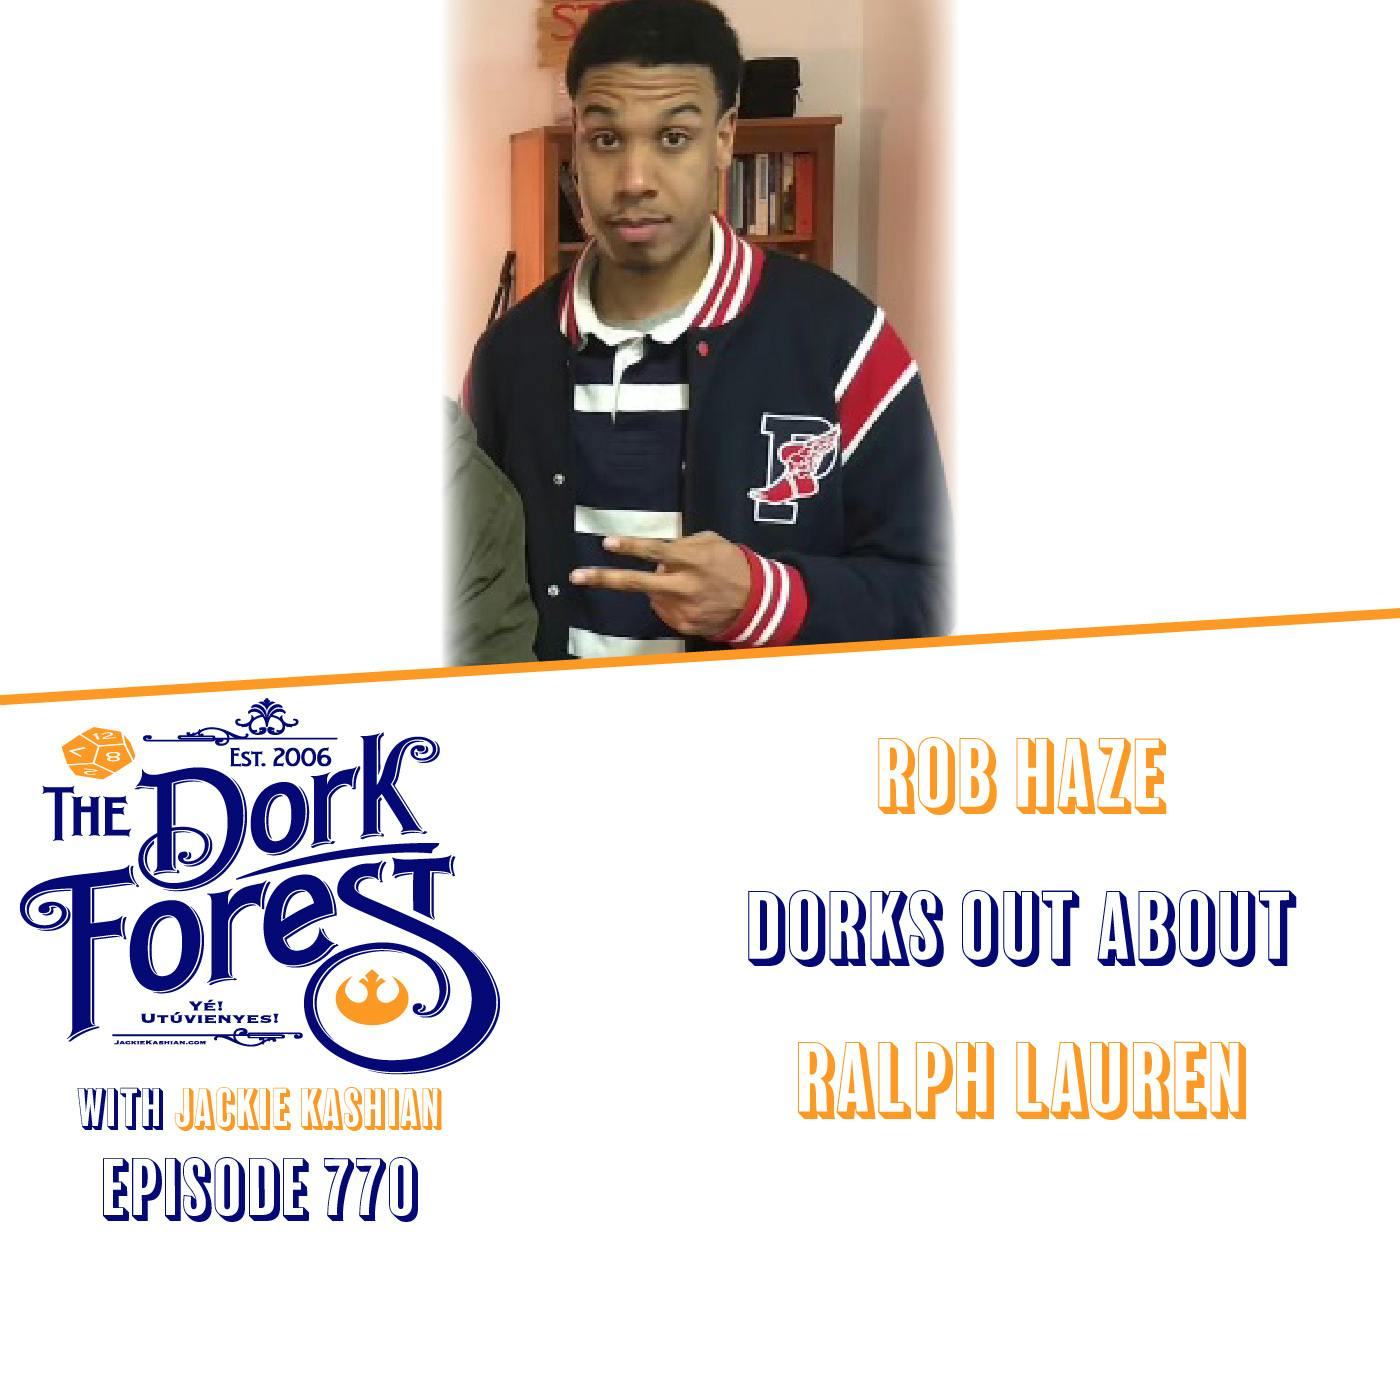 Rob Haze and the love of Ralph Lauren via The Decepticons – EP 770